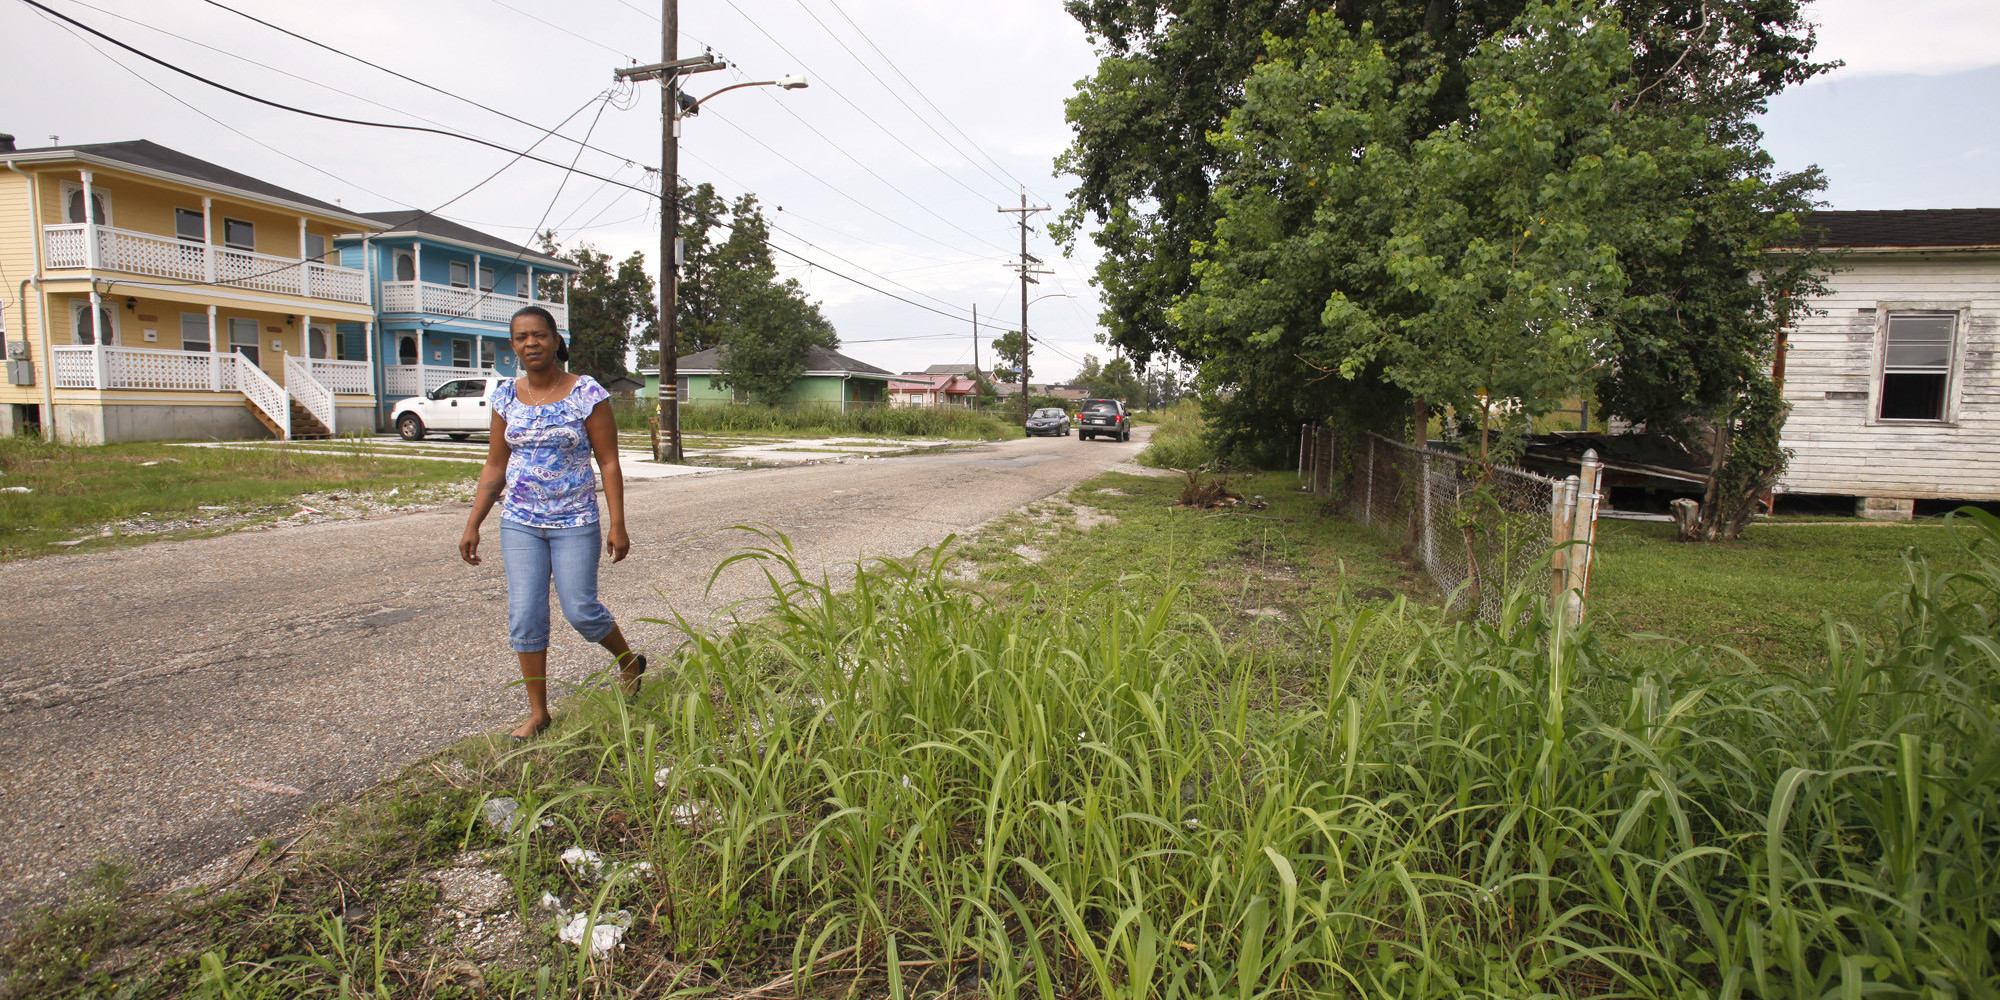 New Orleans' Lower Ninth Ward Targeted For Gentrification 'It's Going